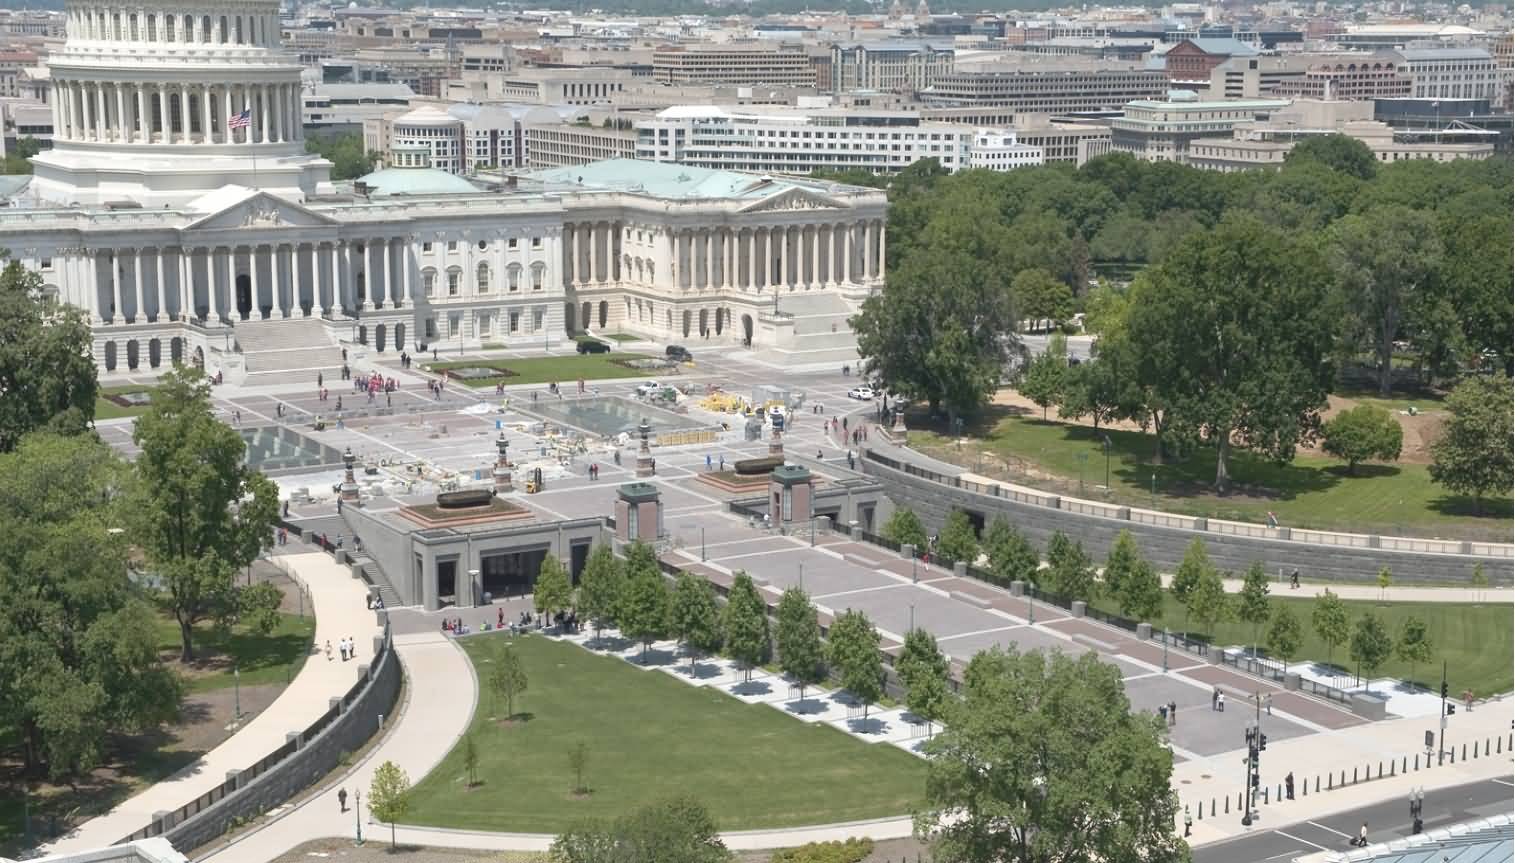 The United States Capitol's East Front Plaza And Adjacent Grounds